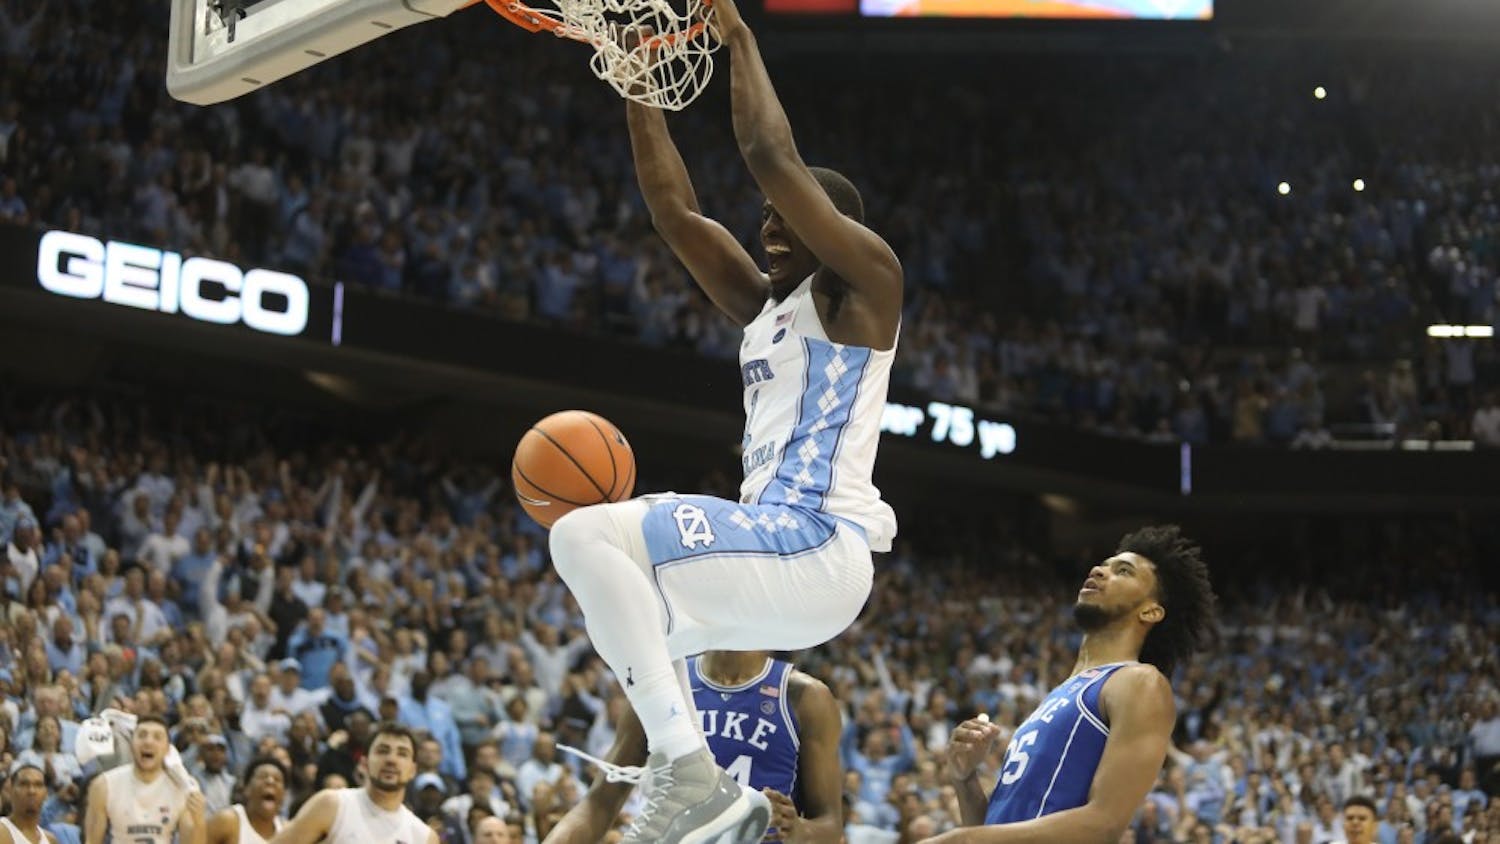 Forward Theo Pinson (1) dunks in the final seconds of UNC's 82-78 win over Duke on Thursday night in the Smith Center.